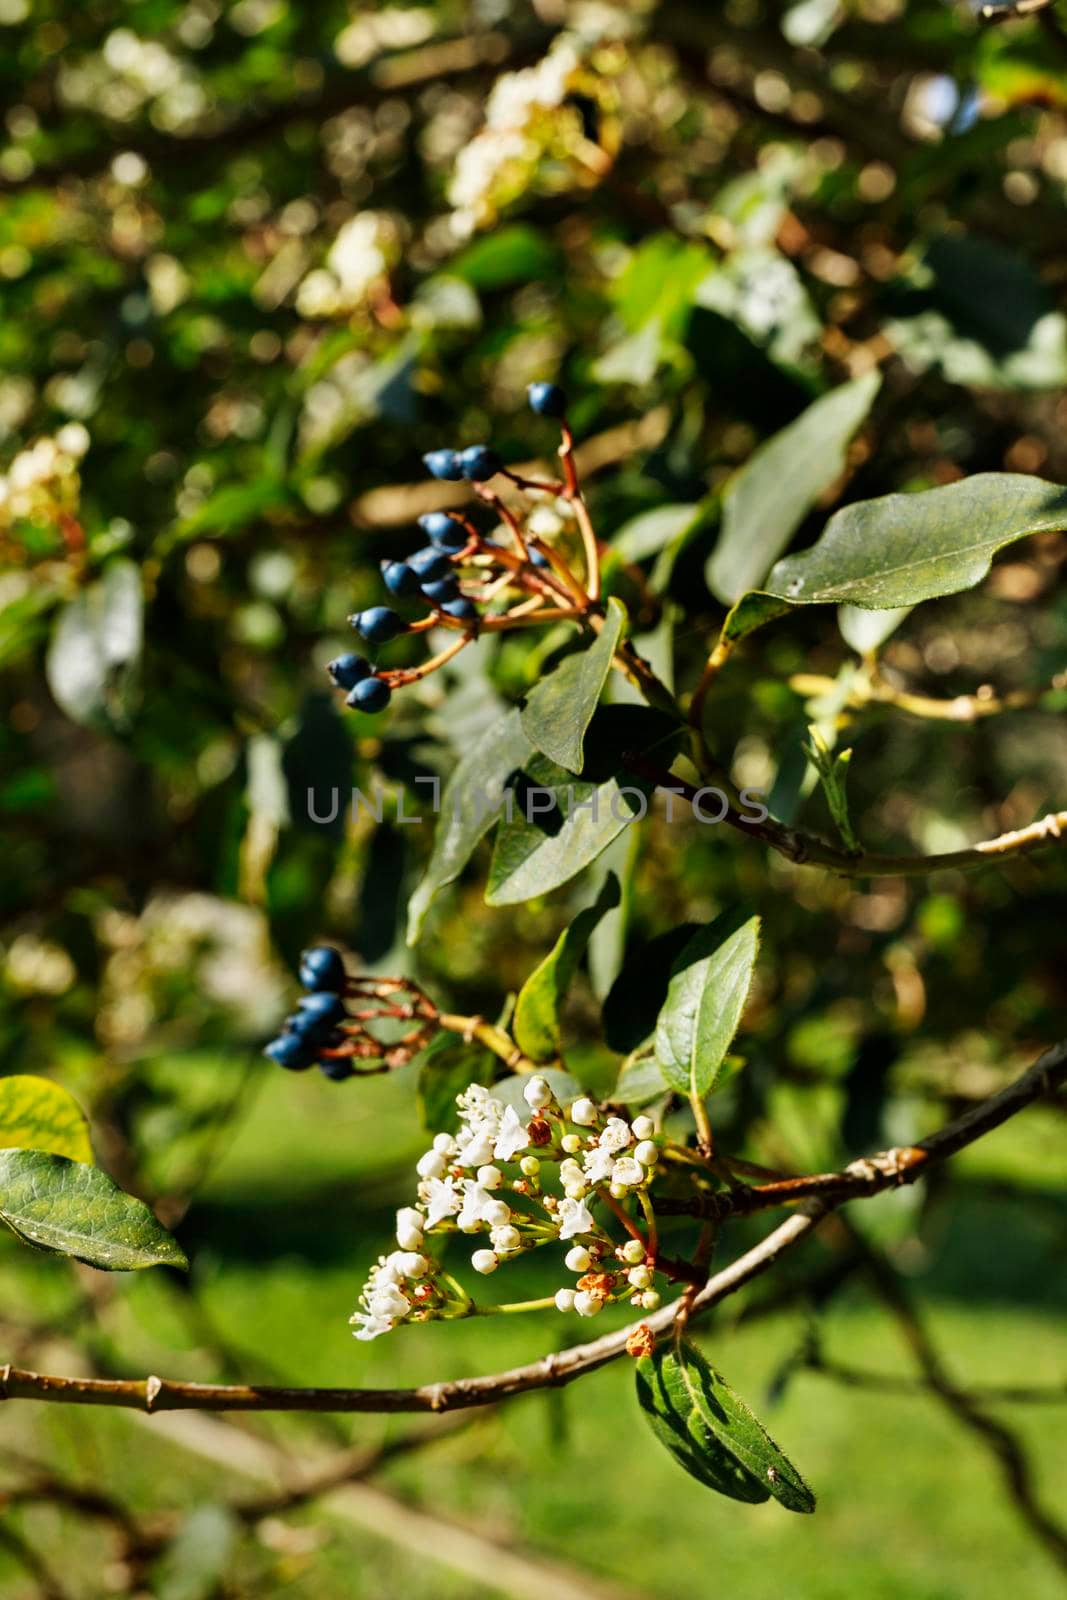 Clusters of white flowers of viburnum plant and blue oval fruits